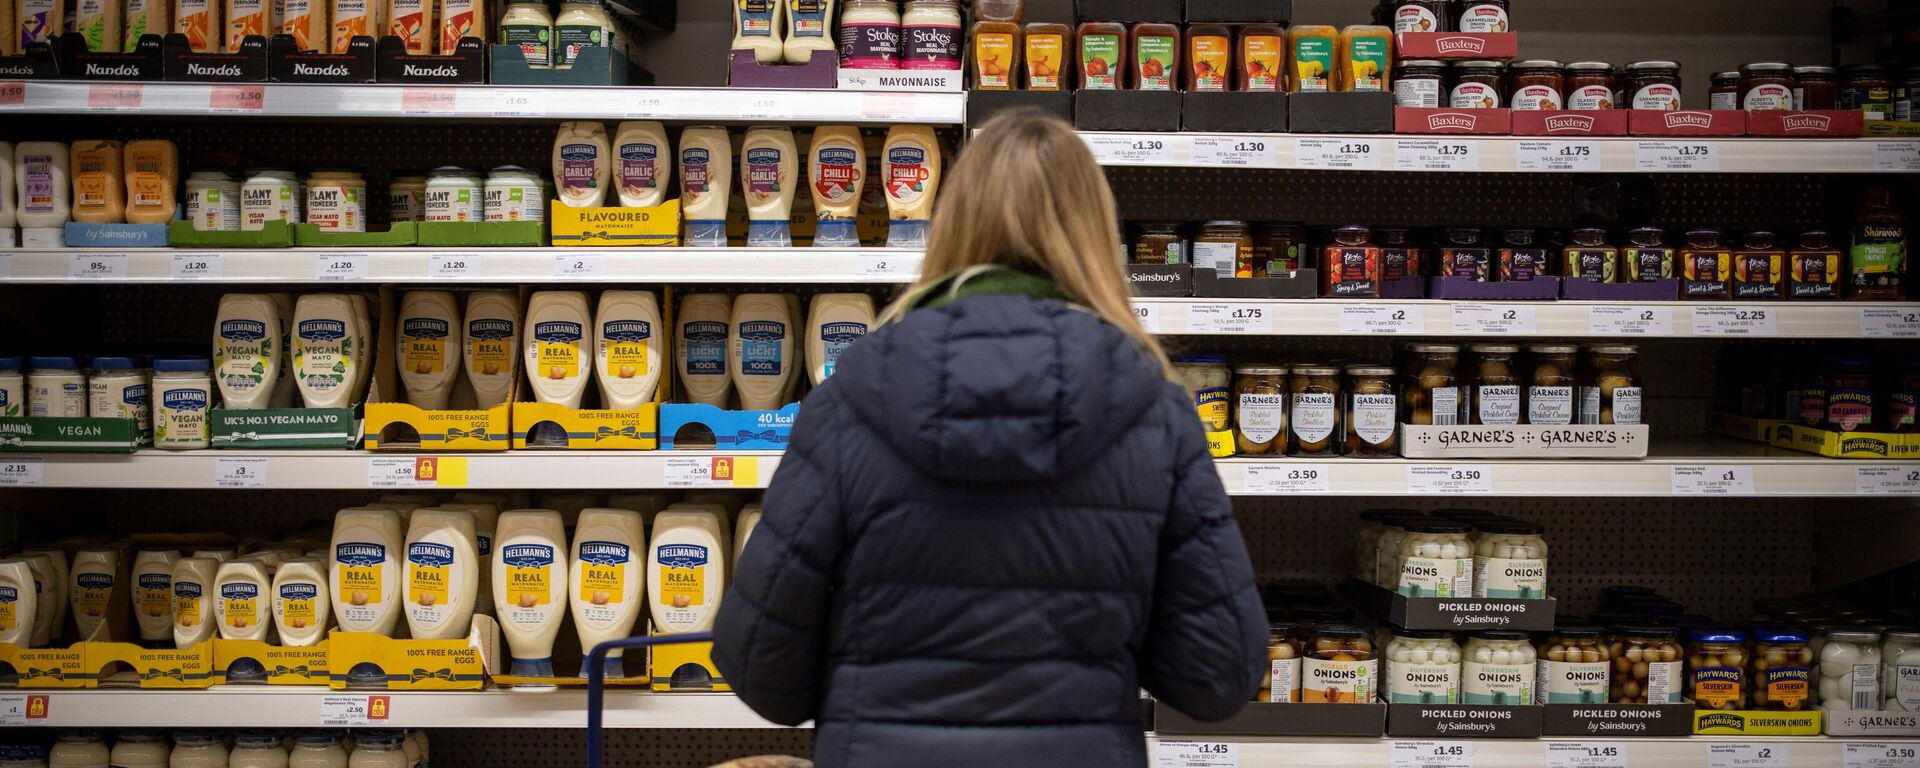 A customer shops for mayonnaise and condiments at a Sainsbury's supermarket in Walthamstow, east London on February 13, 2022 - Sputnik International, 1920, 14.03.2022